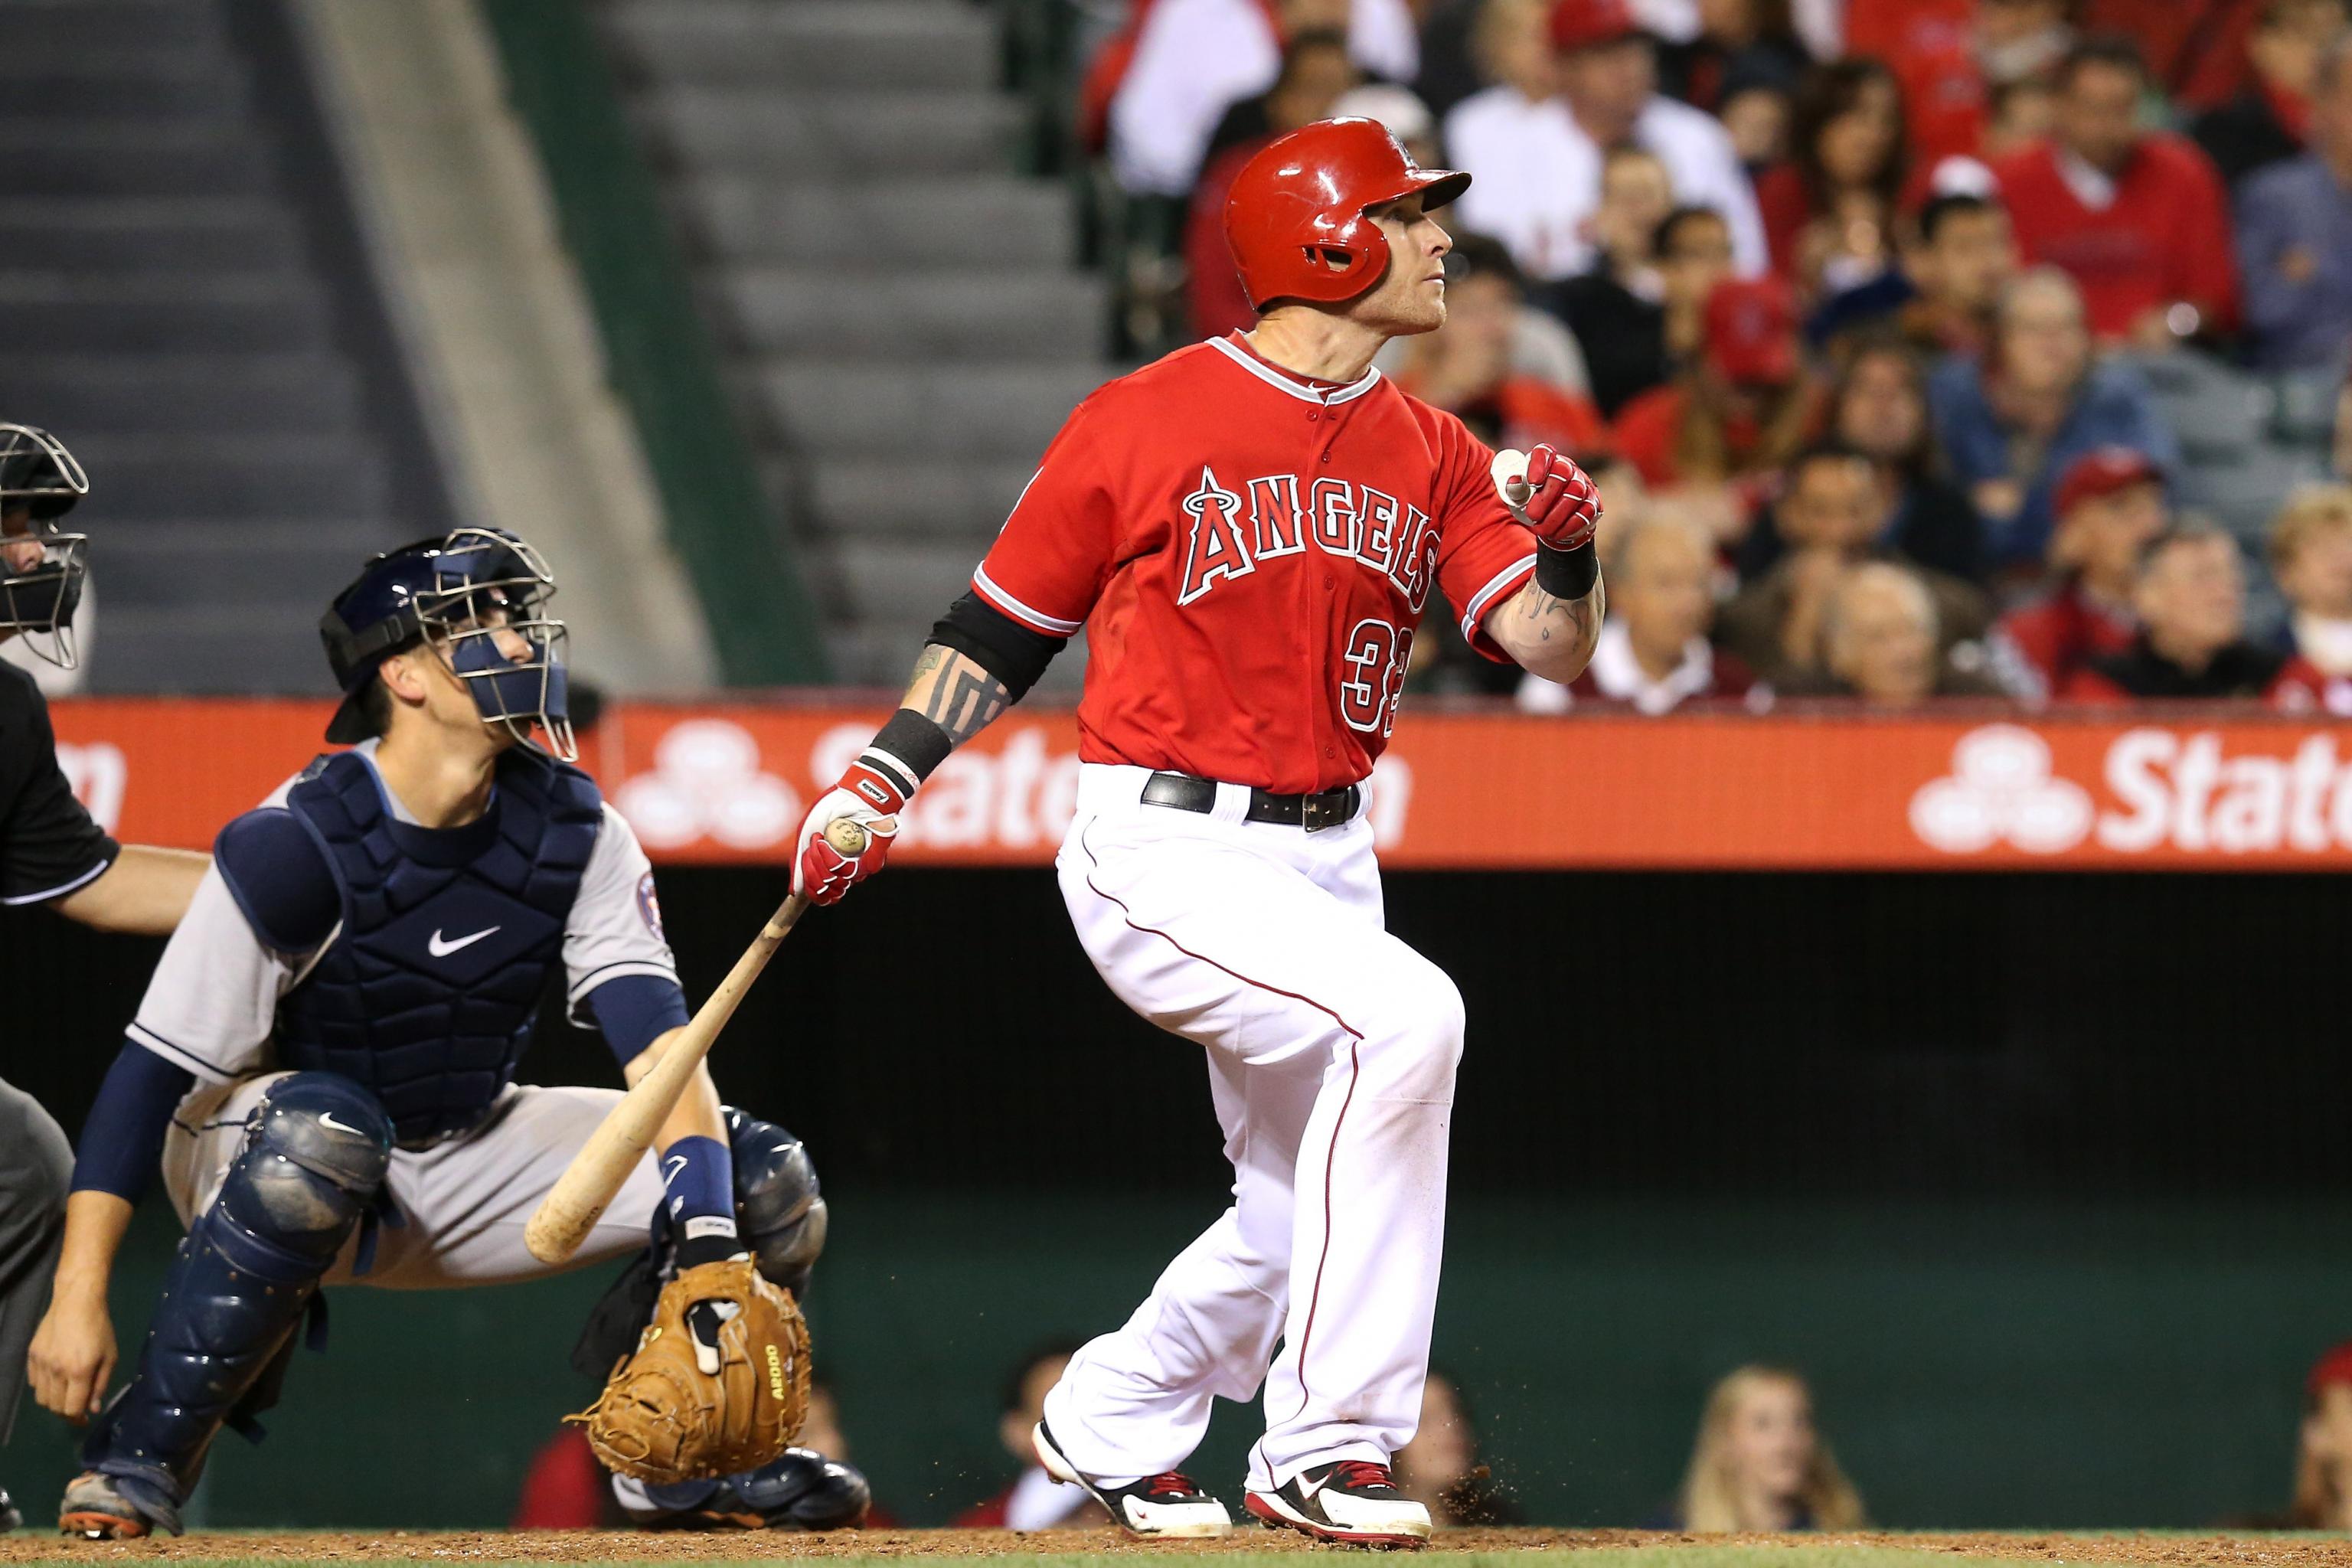 Angels paying Josh Hamilton $26 million to play for rival Rangers